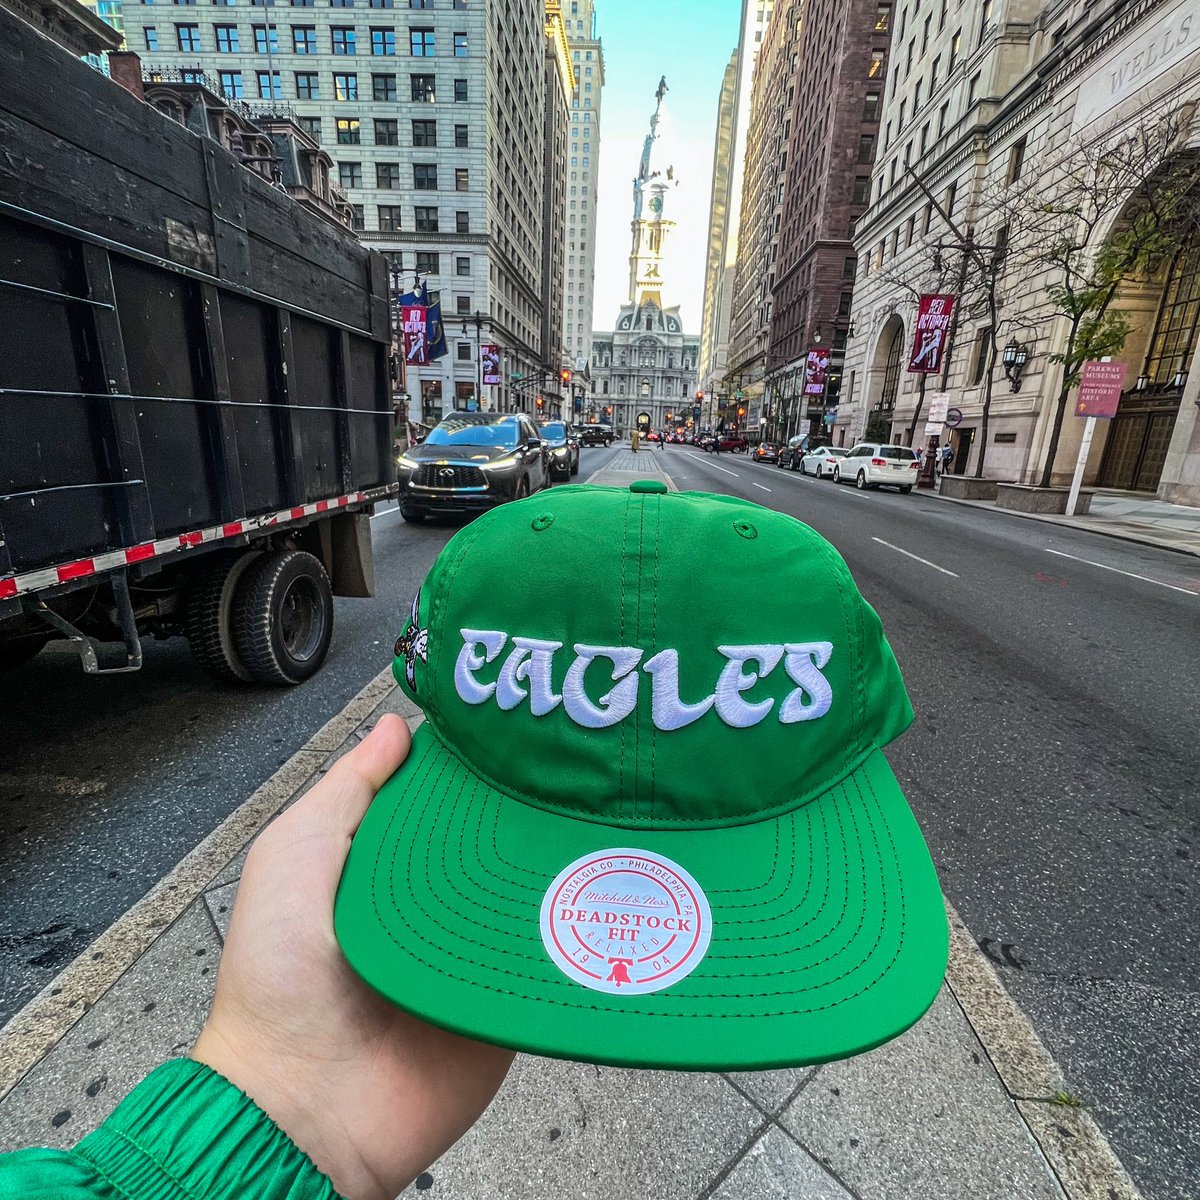 St. Patrick's Day Collection Mitchell & Ness Nostalgia Co.